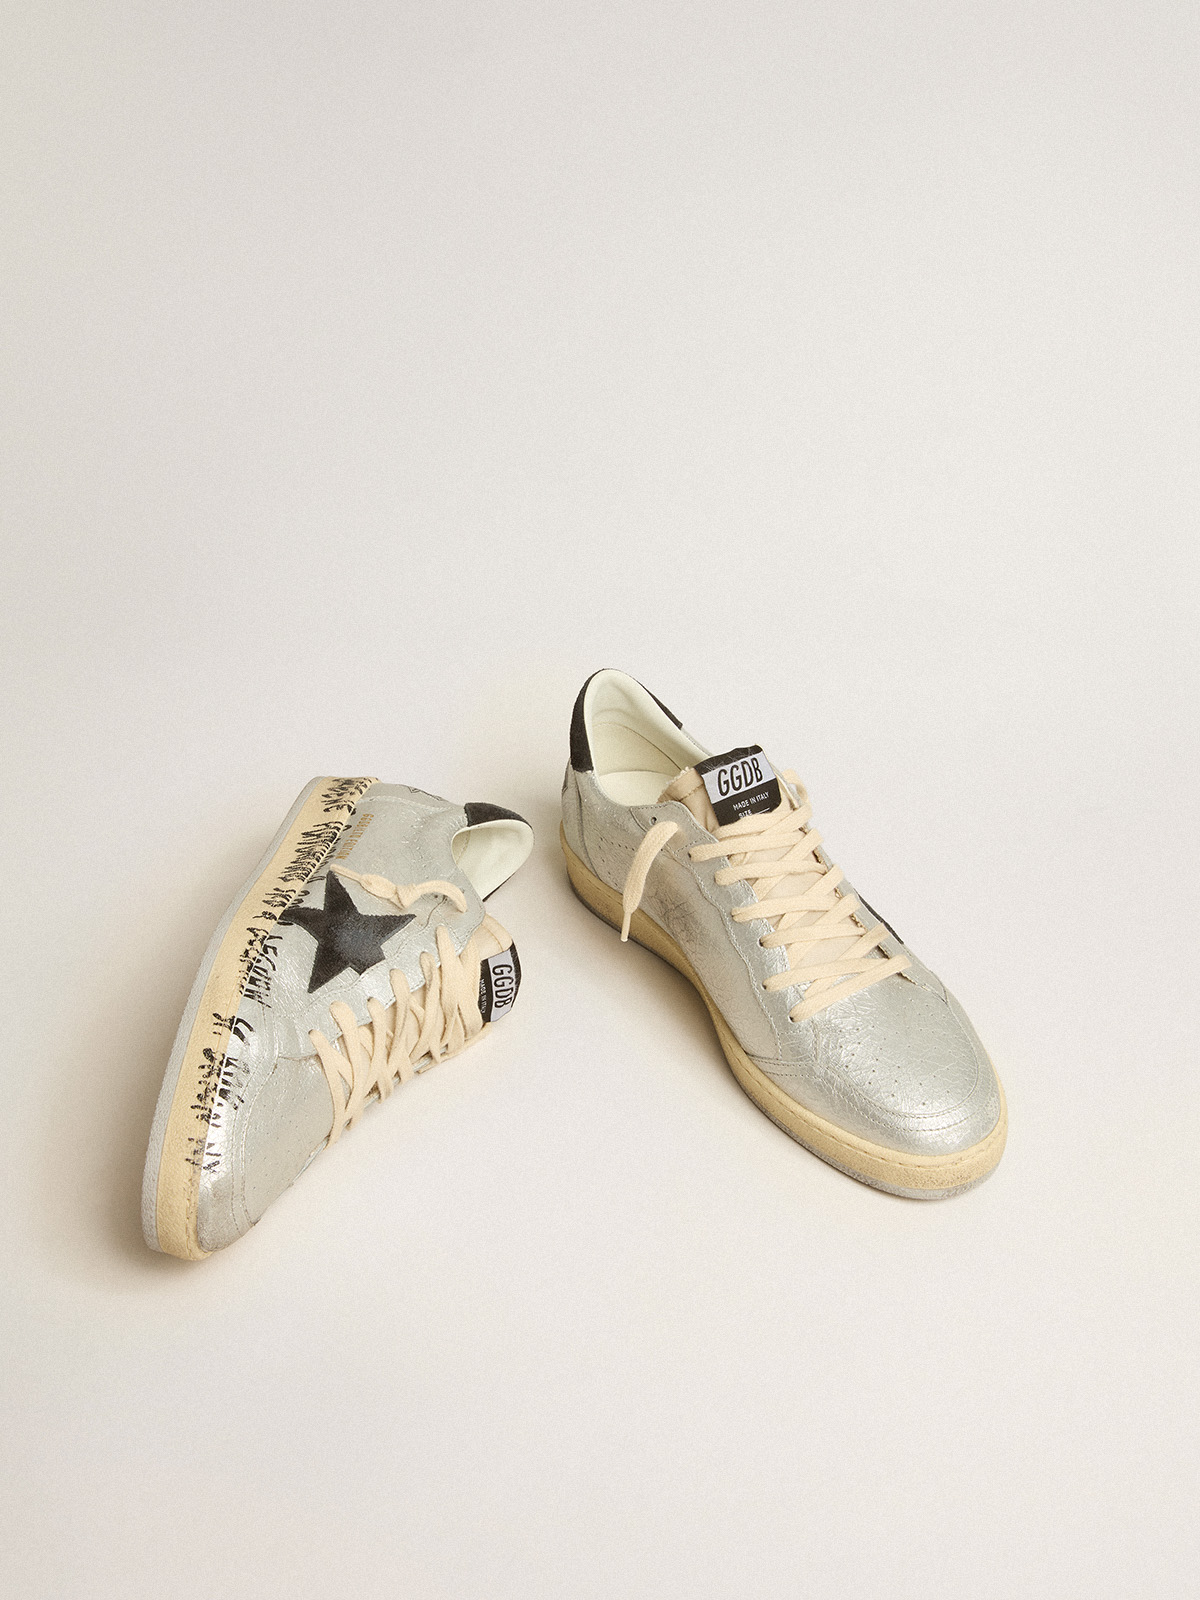 Ball Star LTD in silver leather with gray suede star and heel tab | Golden  Goose